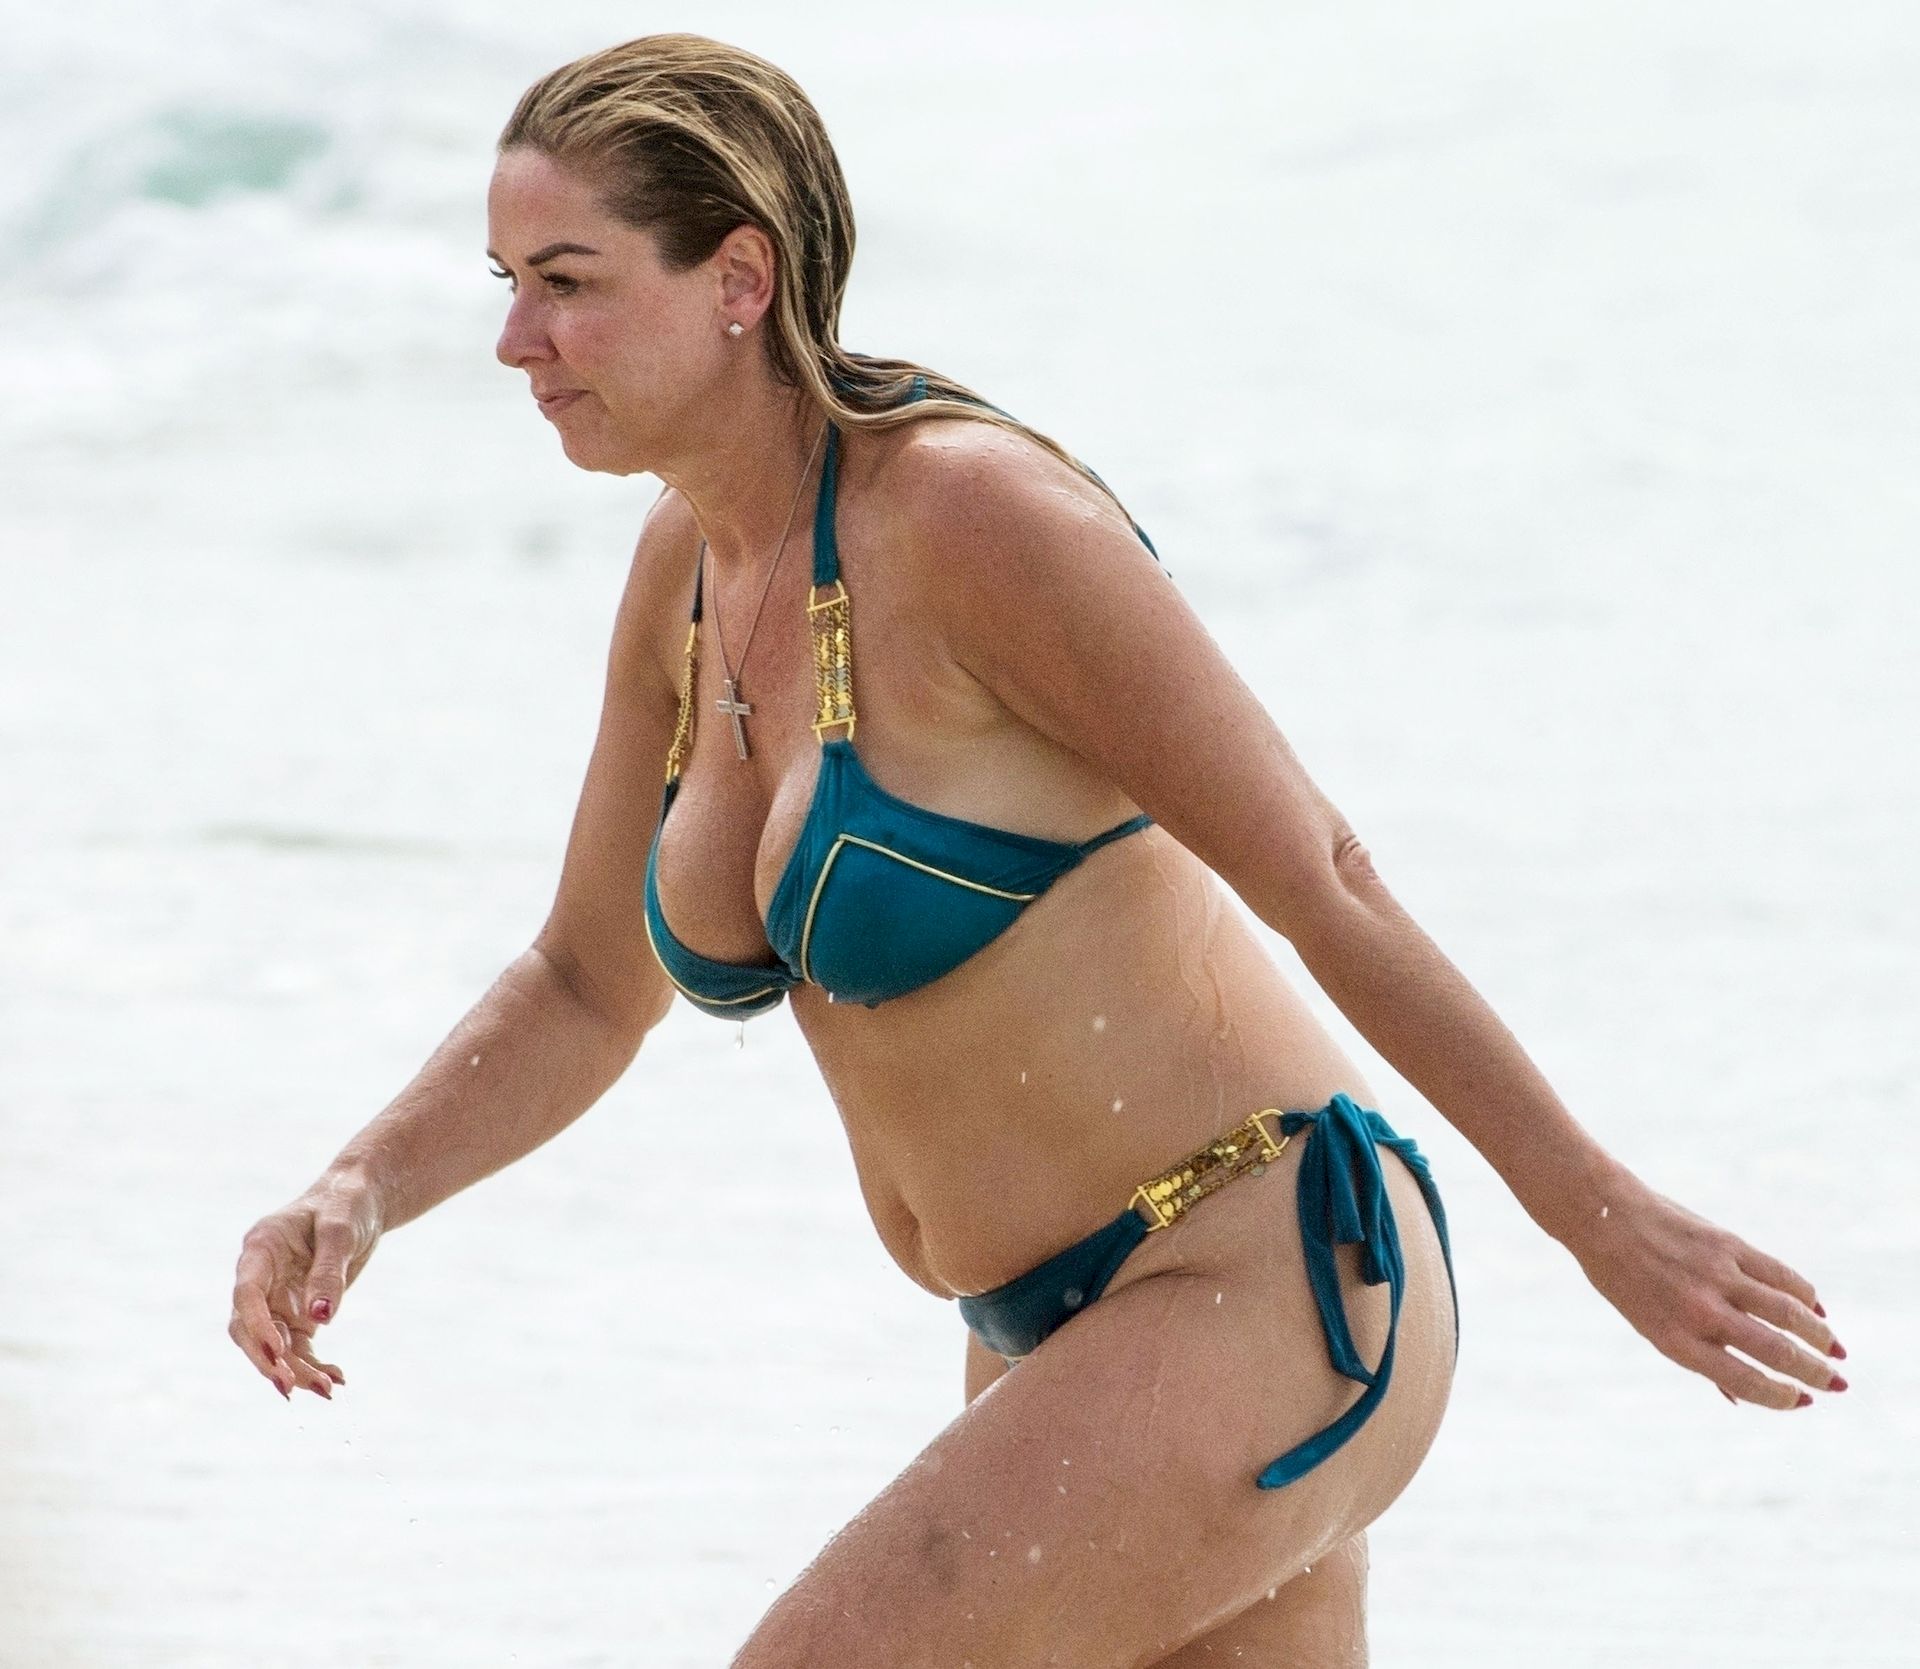 Claire Sweeney Dons Her Bikini Out In Barbados 0001